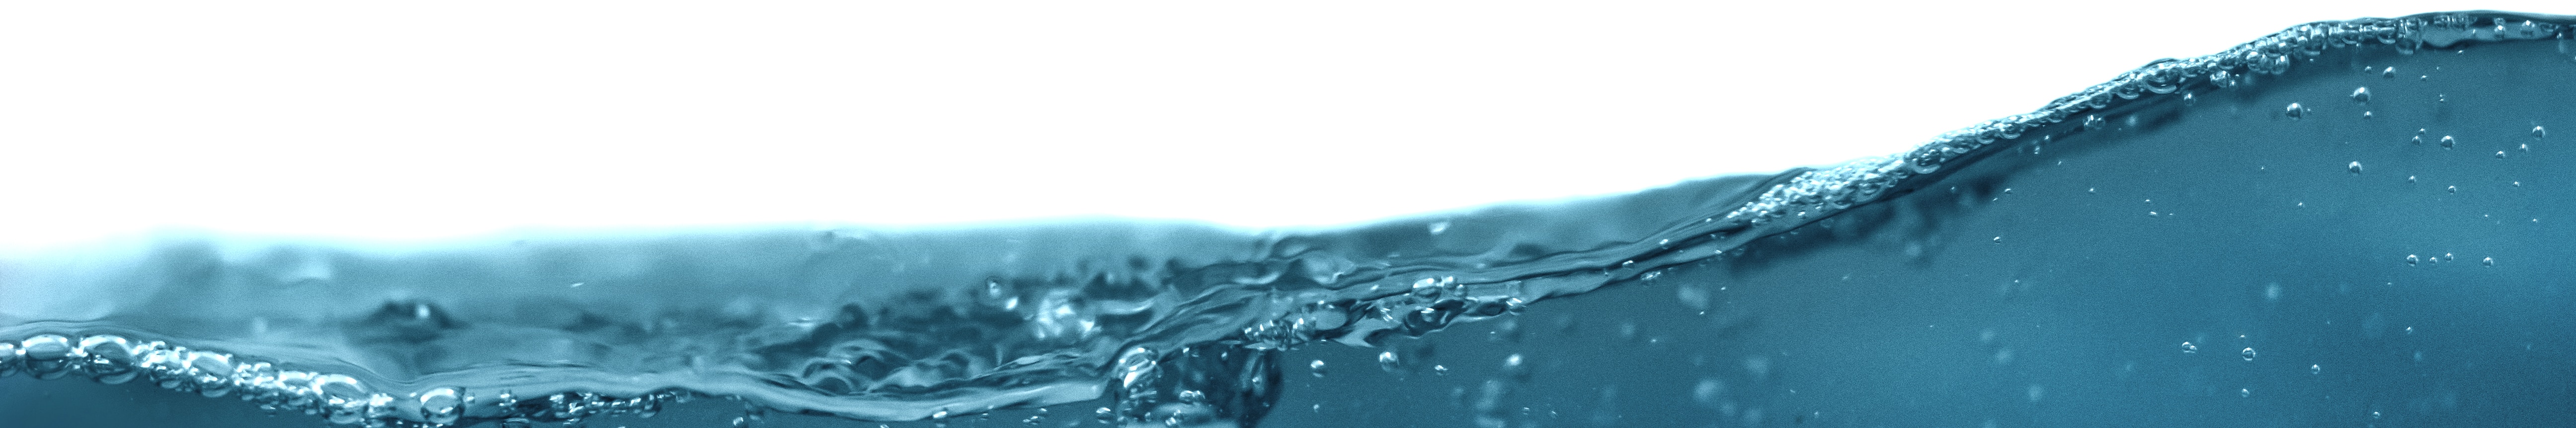 In 2022, Qualcomm withdrew 2.64 Mn m3 of water, without disclosing its recycling rate